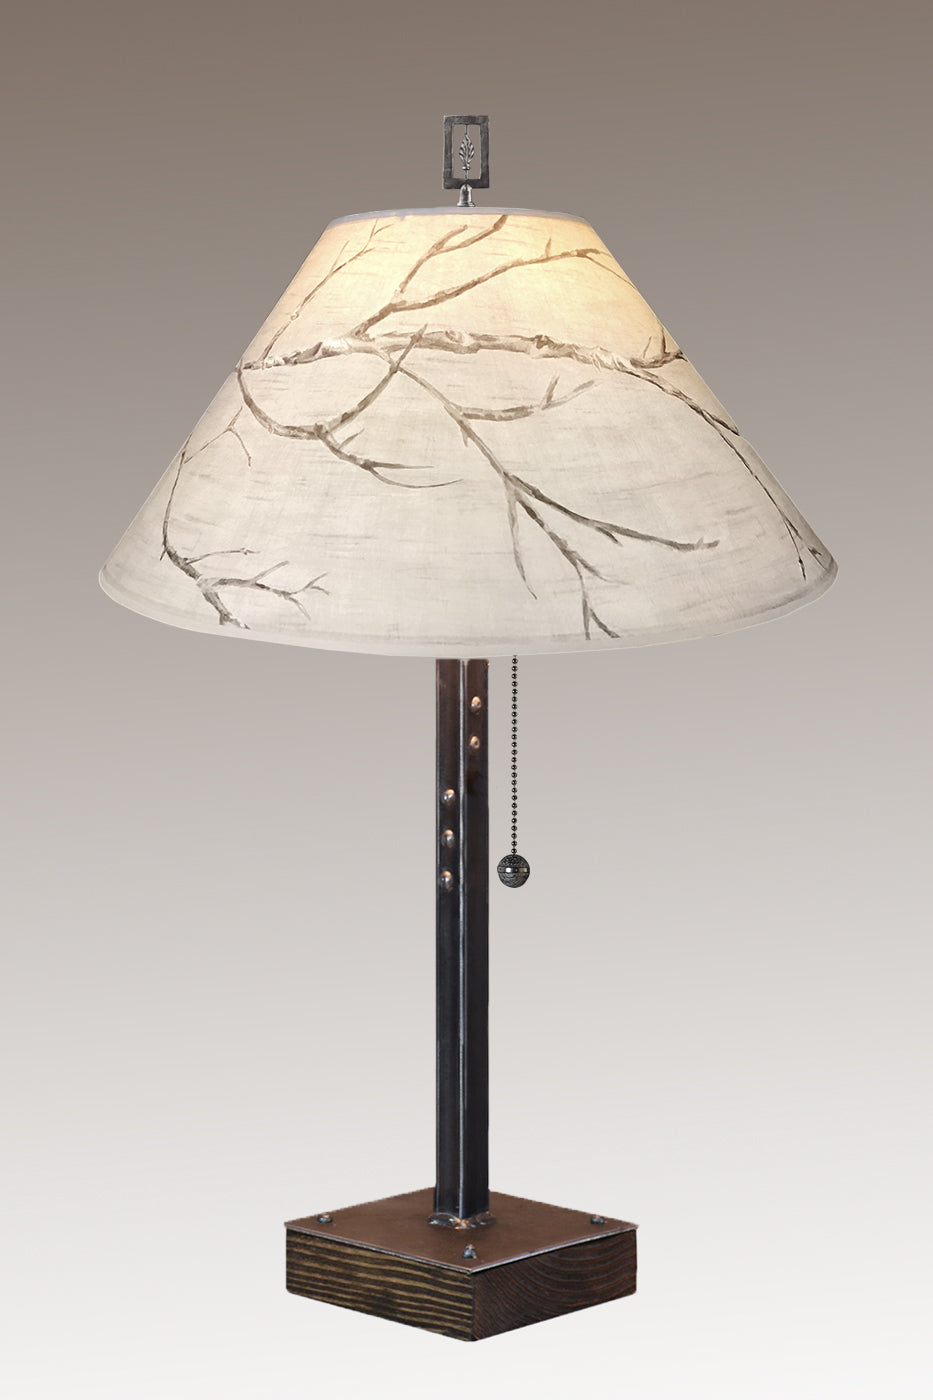 Janna Ugone &amp; Co Table Lamps Steel Table Lamp on Wood with Large Conical Shade in Sweeping Branch